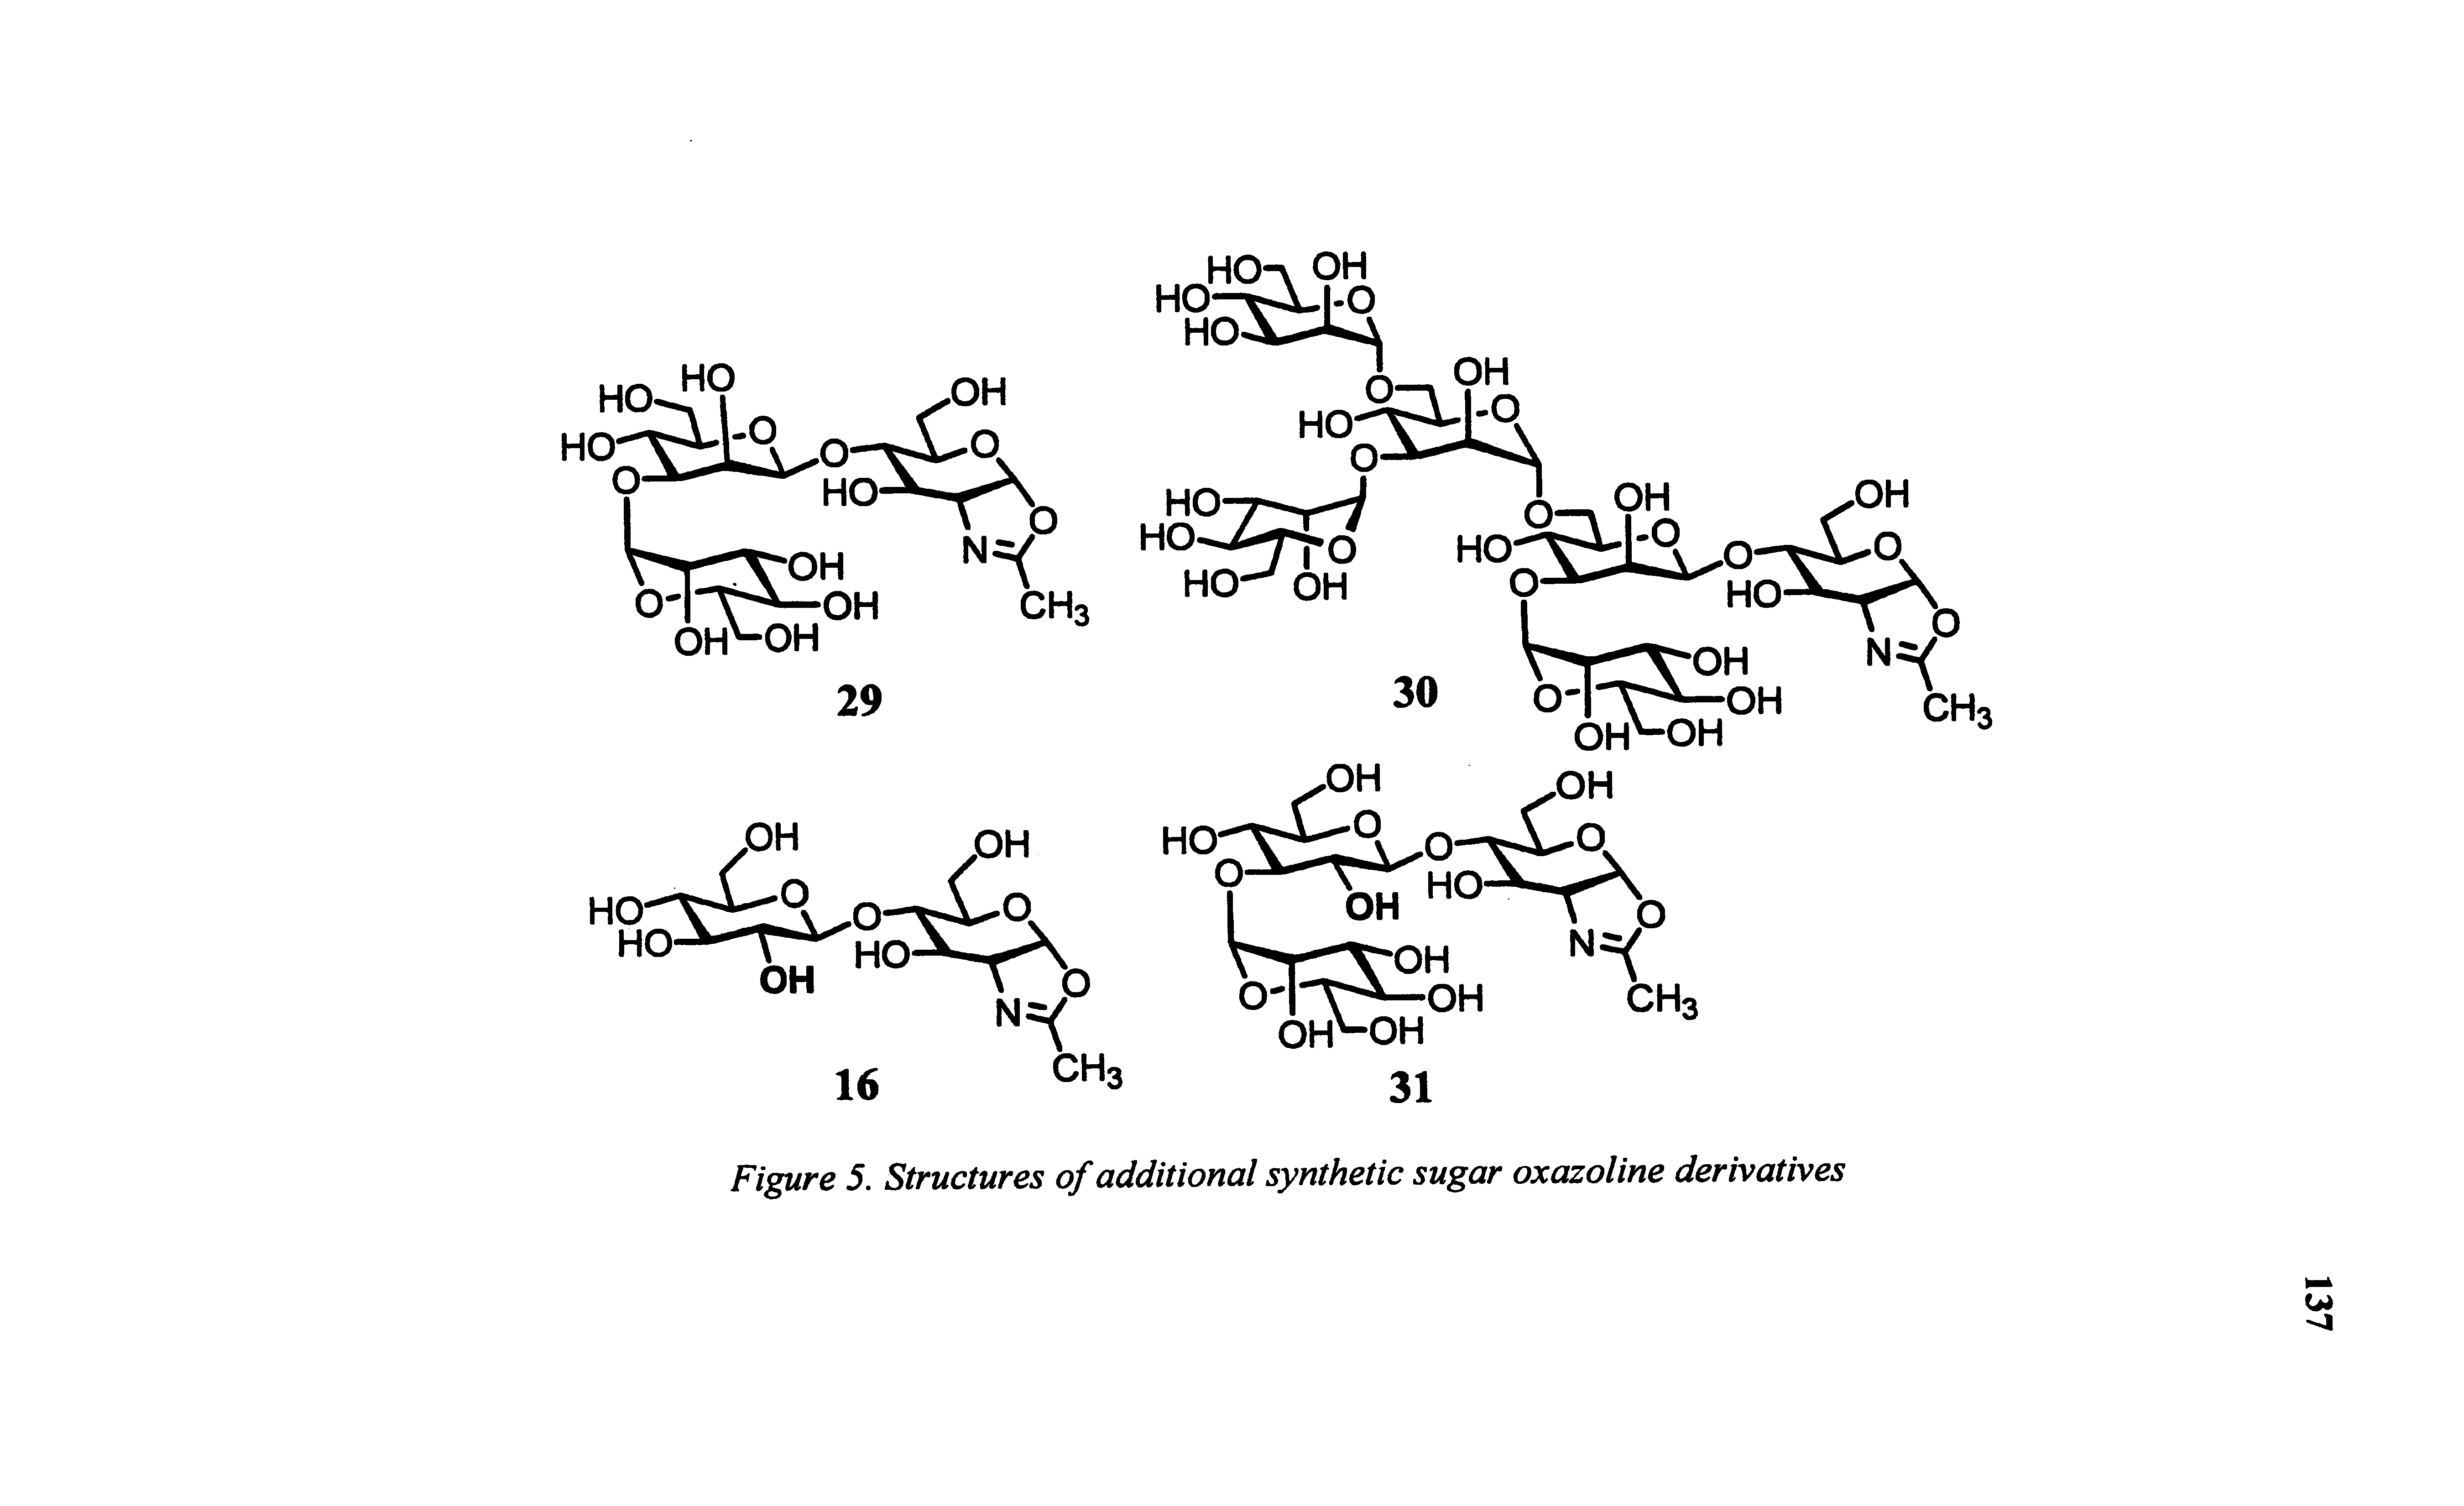 Figure 5. Structures of additional synthetic sugar oxazoline derivatives...